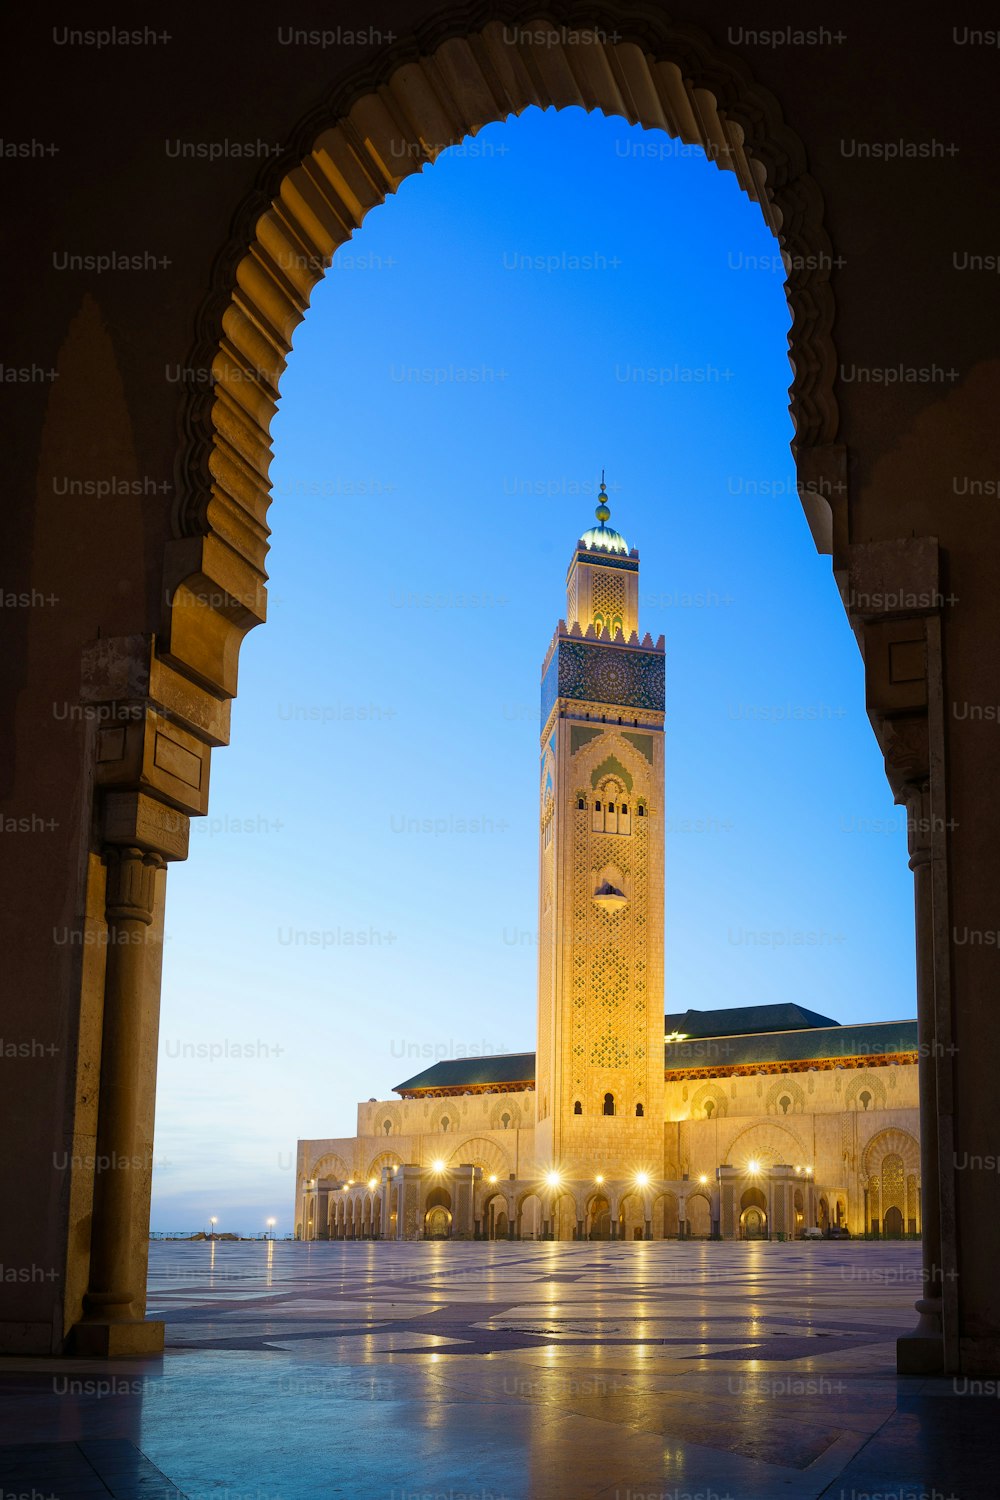 The illuminated Hassan II Mosque with its reflection on the stoned ground in Casablanca, Morocco